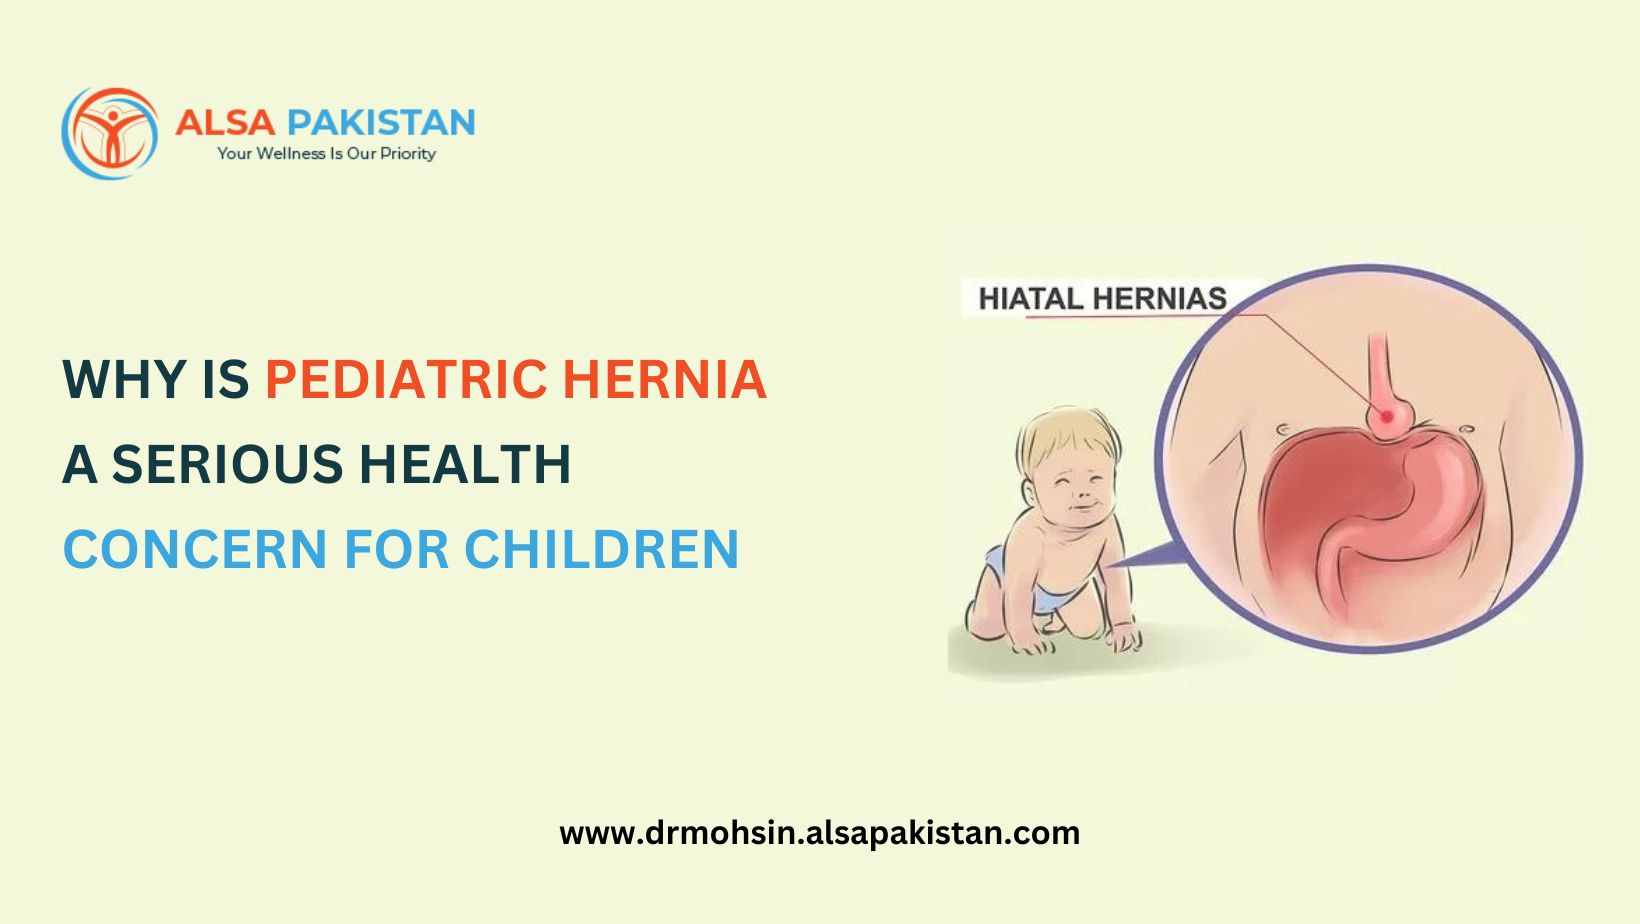 Why is pediatric hernia a serious health concern for children